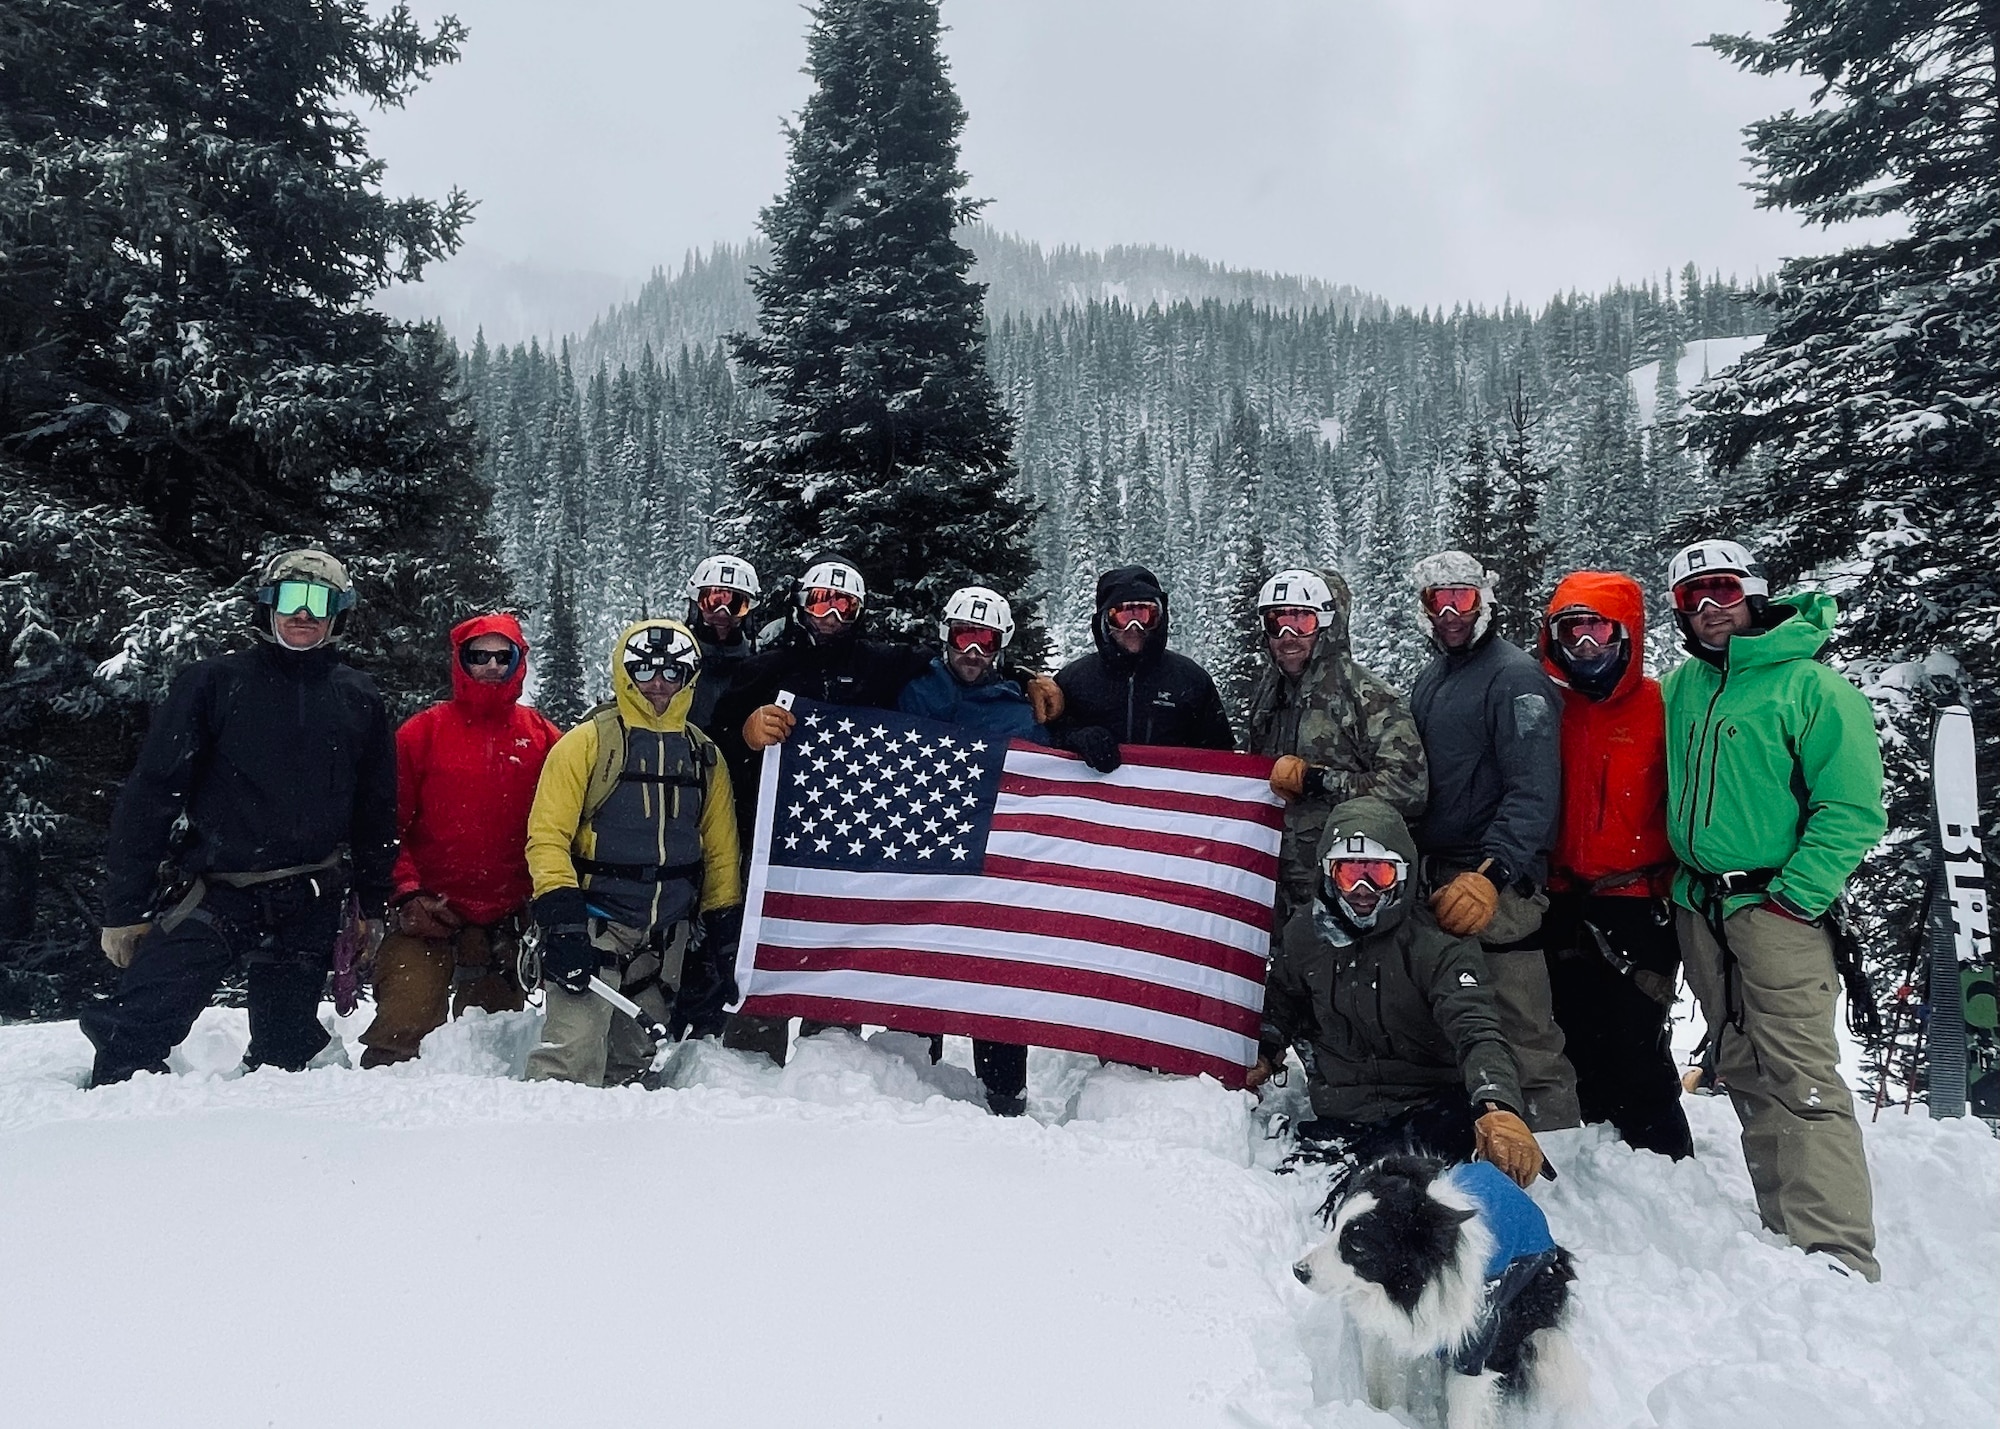 A group of men pose for a picture in the snow holding an American flag.